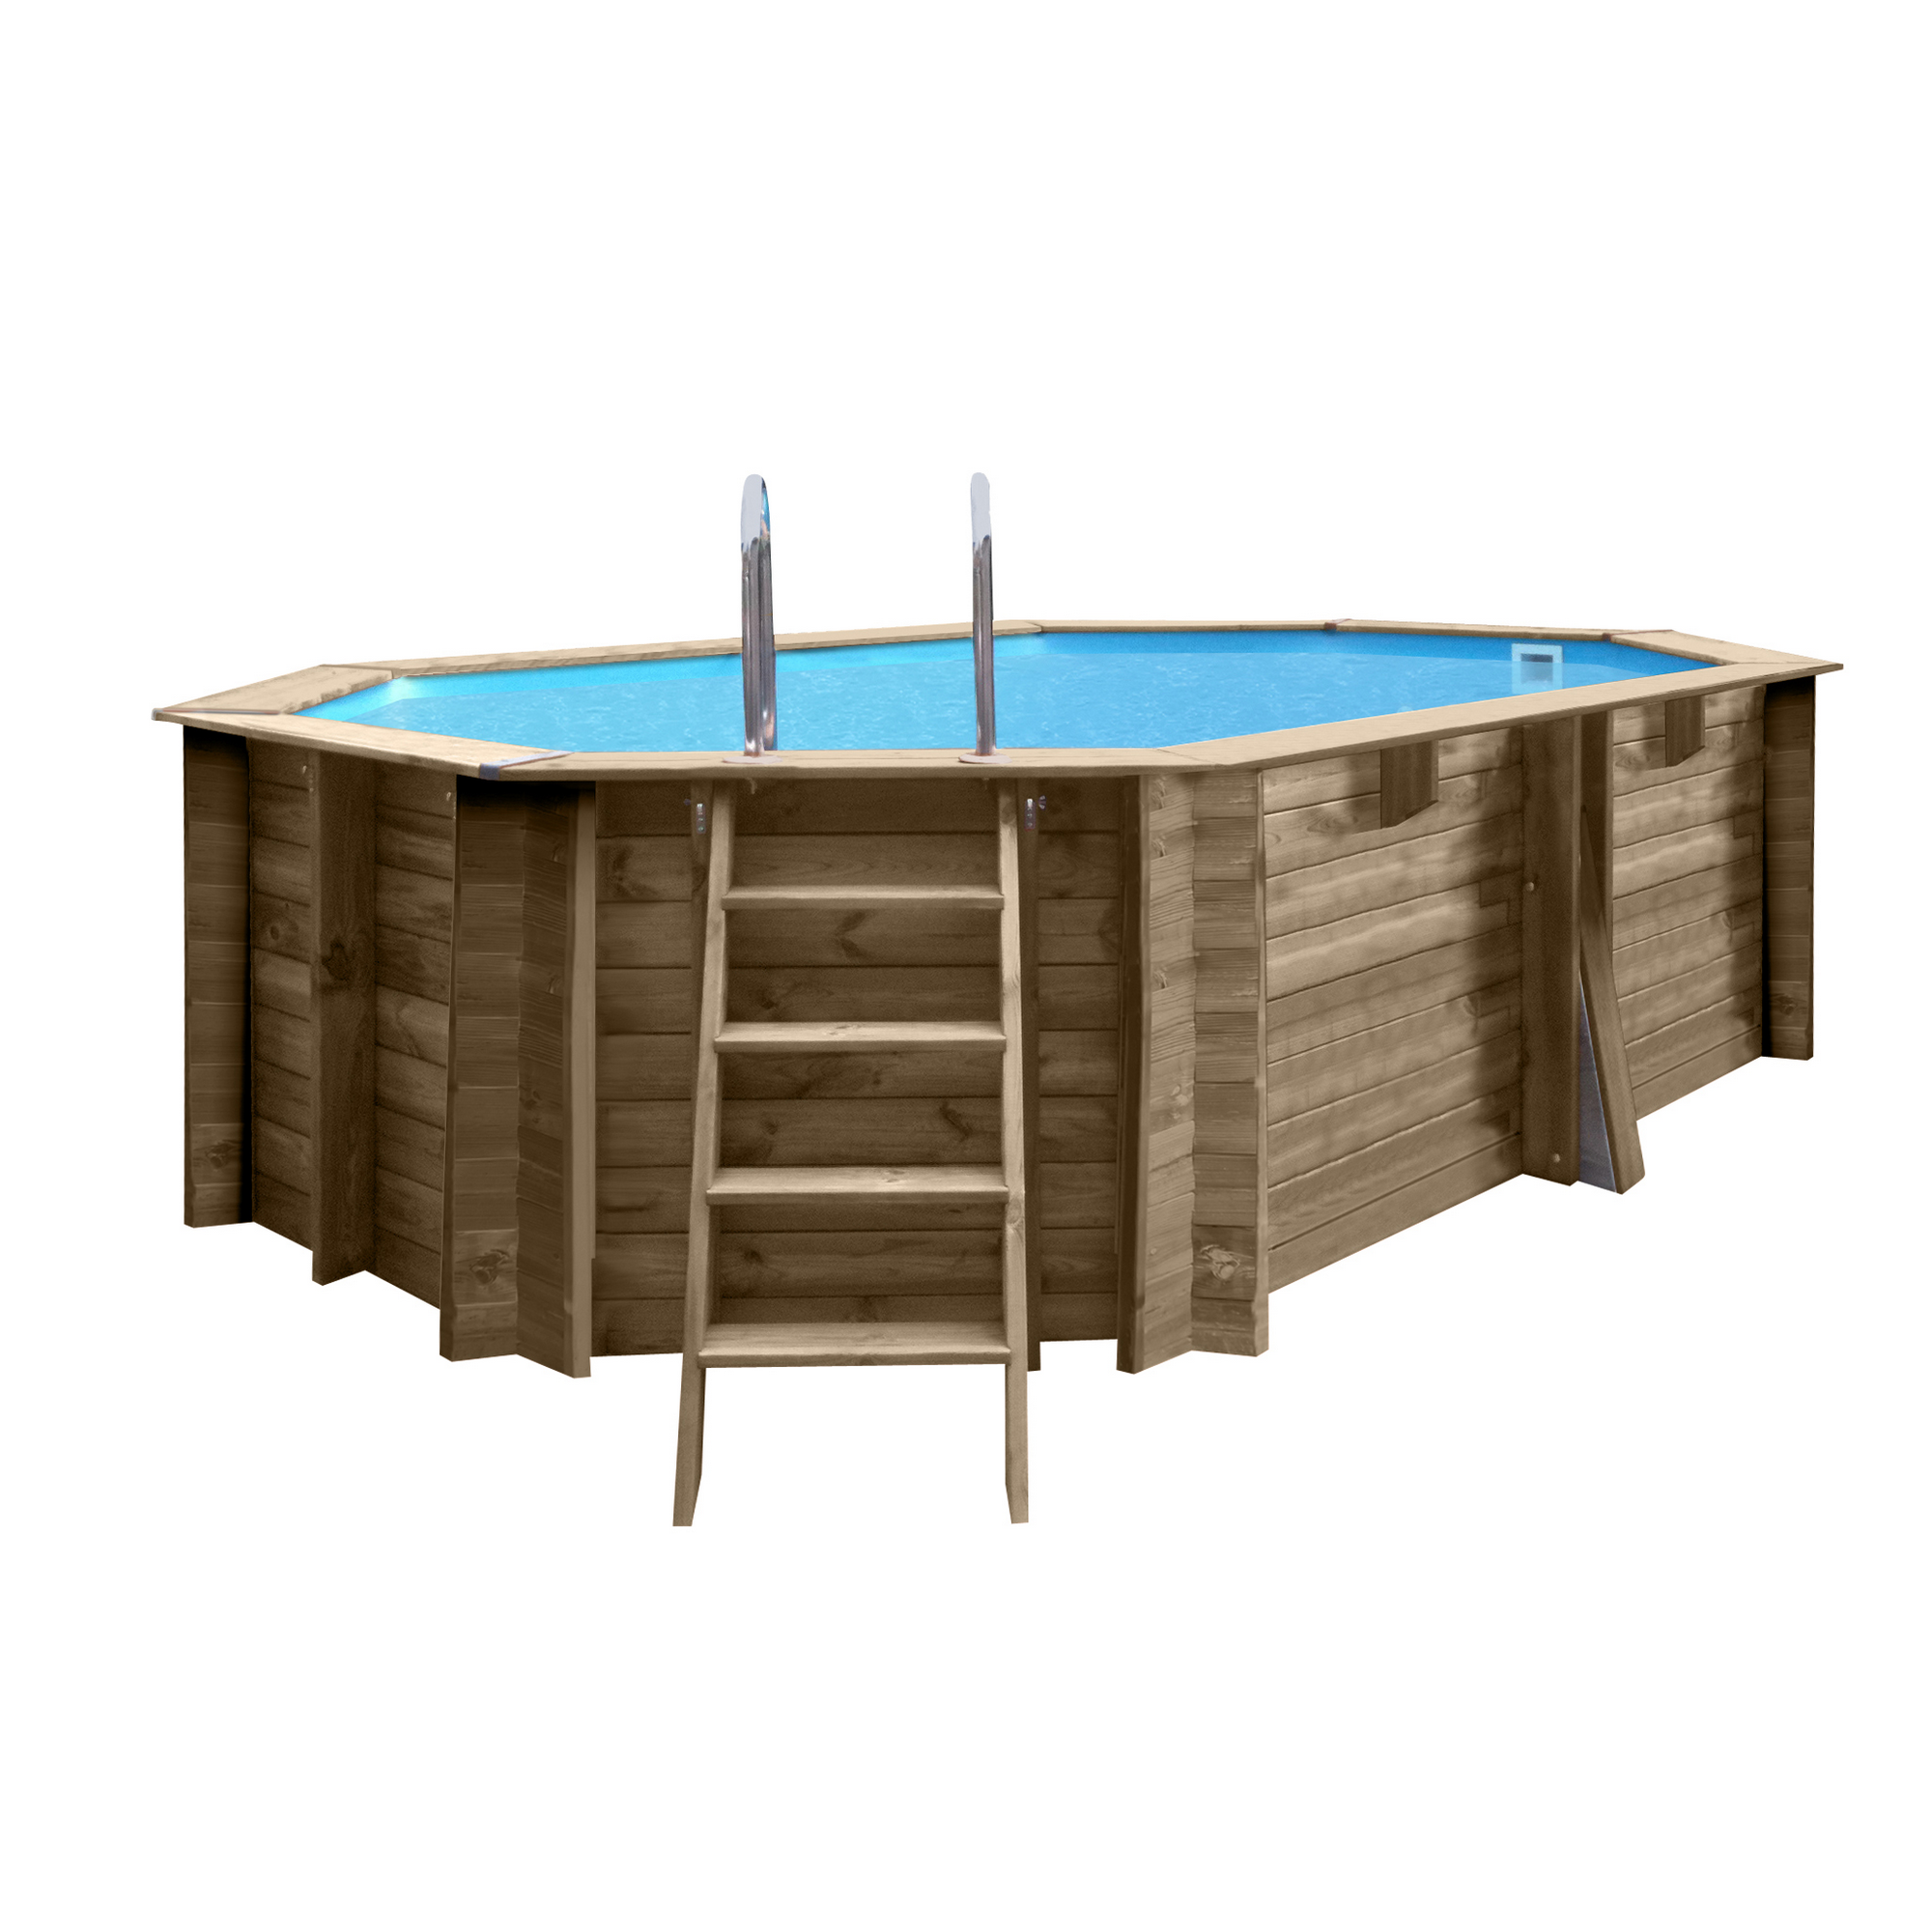 Aufstellpool-Set 'Grenade 2' Holz 436 x 336 x 117 cm + product picture